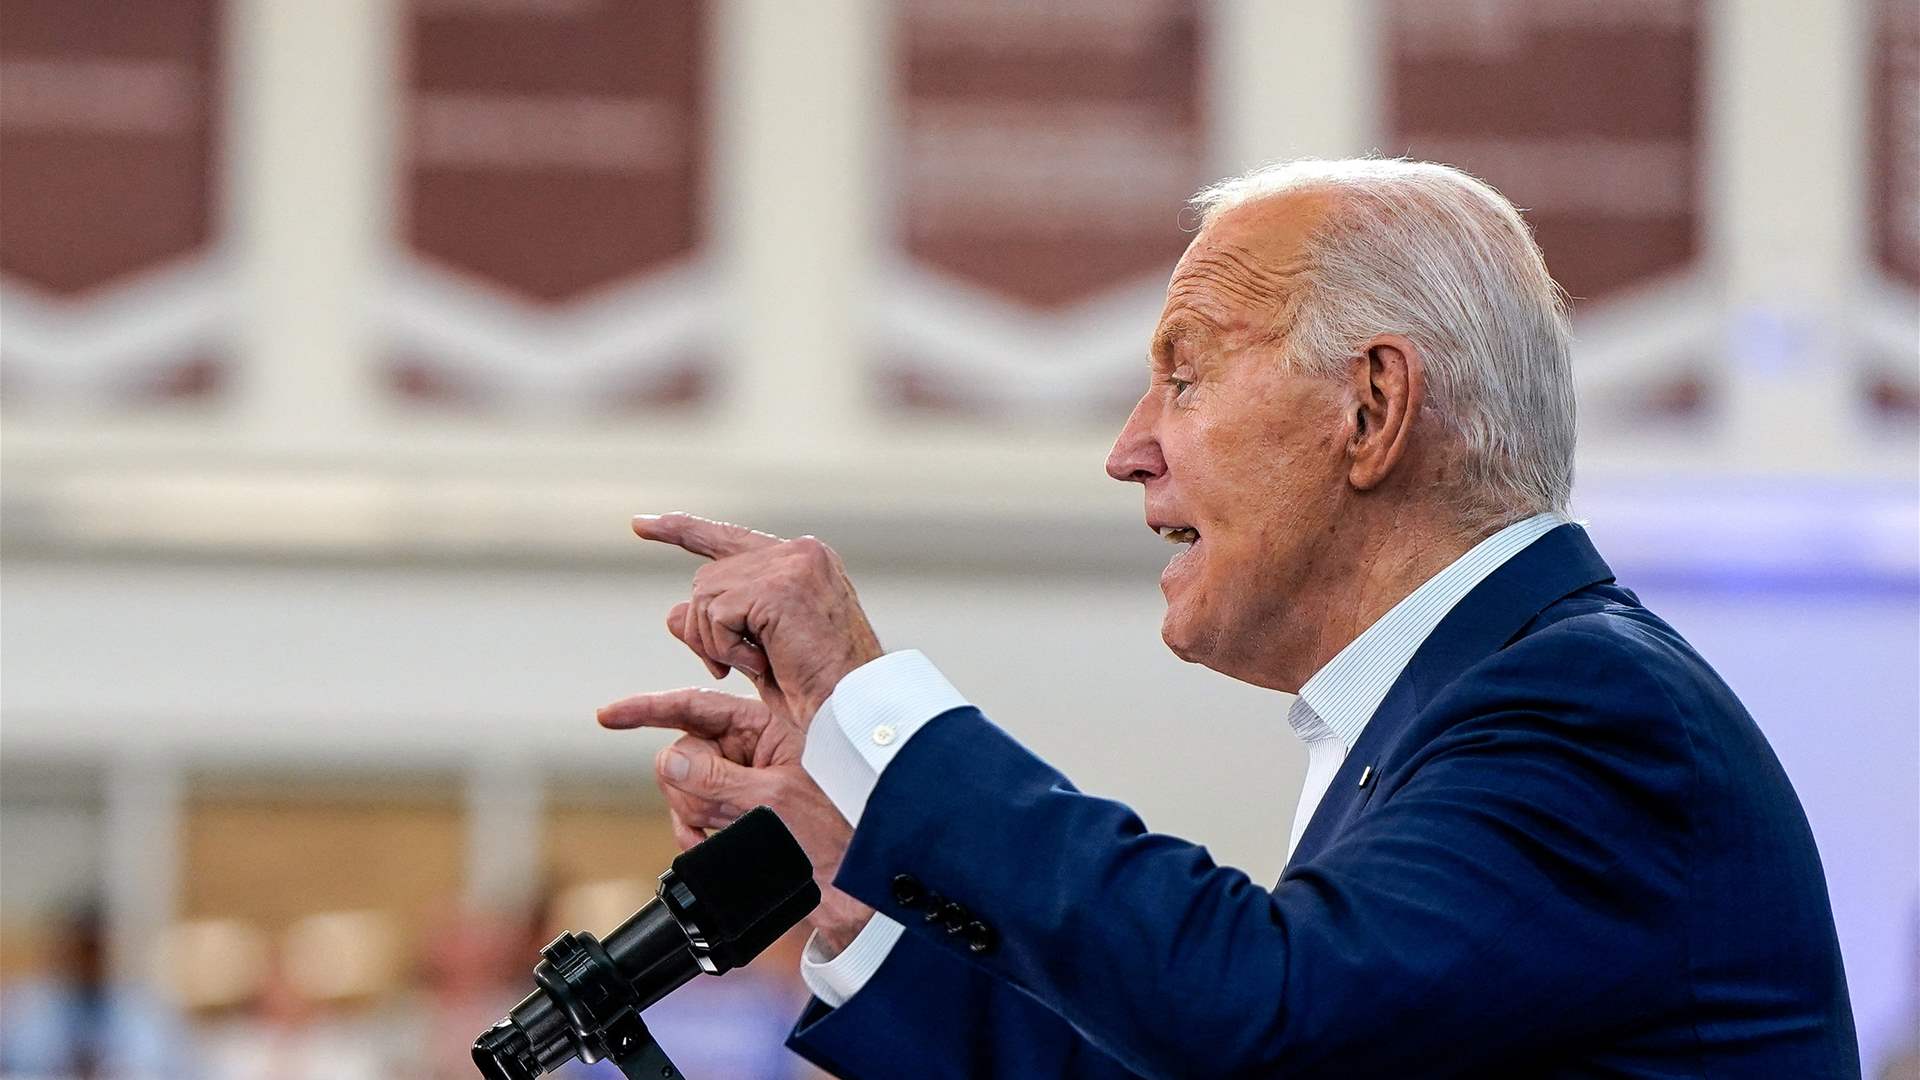 Biden&#39;s surprising exit: Poor polling and funding challenges lead to withdrawal from presidential race